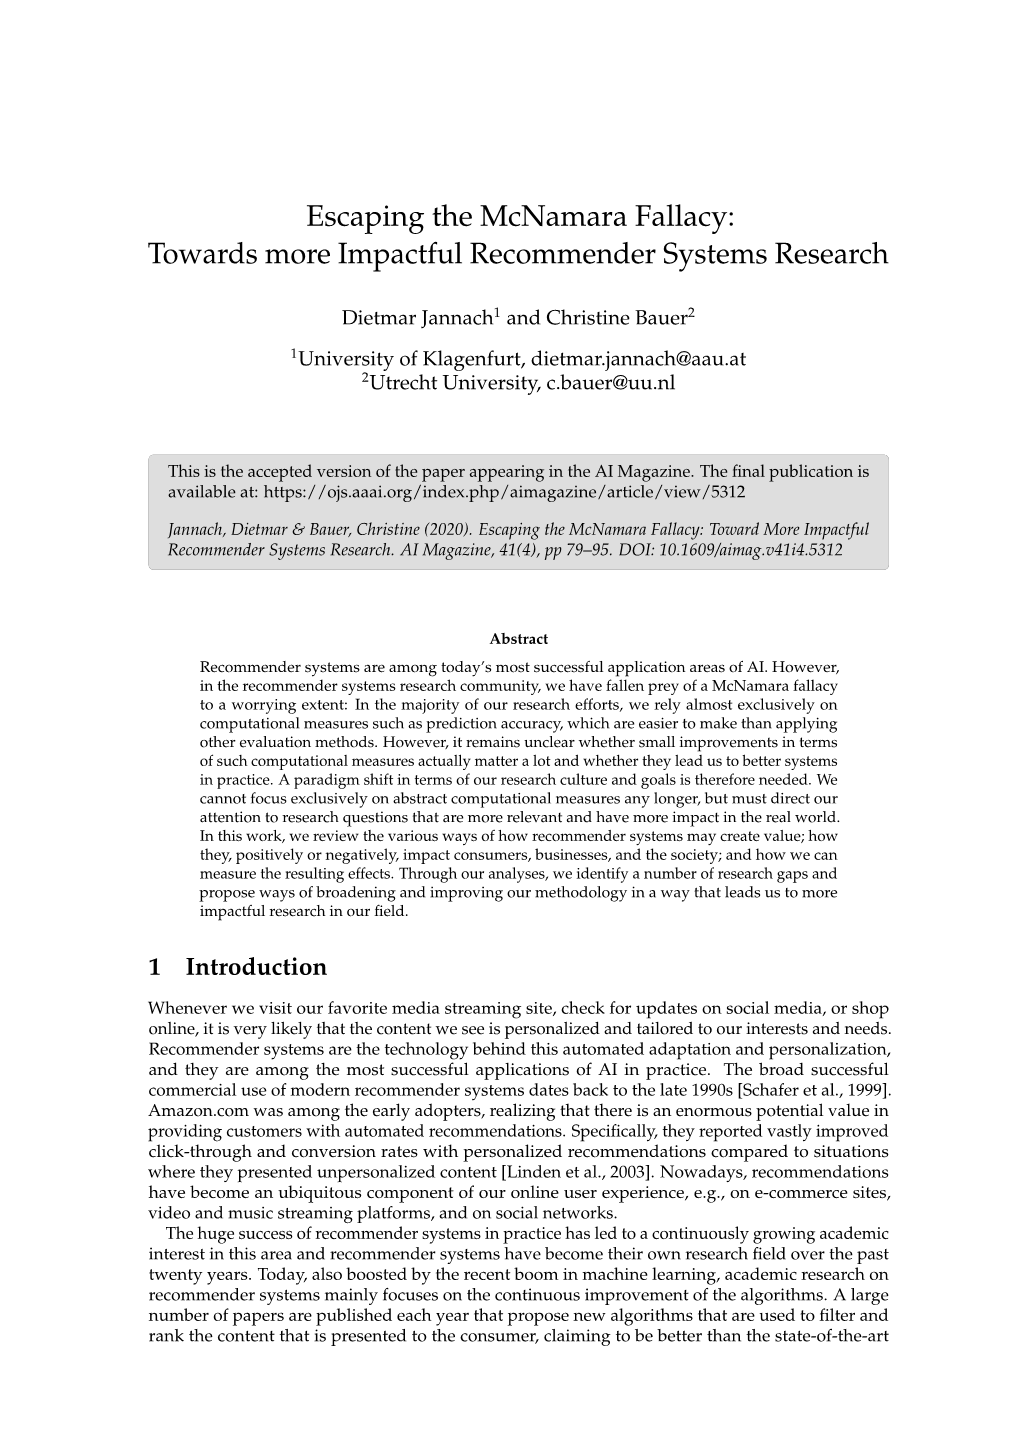 Escaping the Mcnamara Fallacy: Towards More Impactful Recommender Systems Research